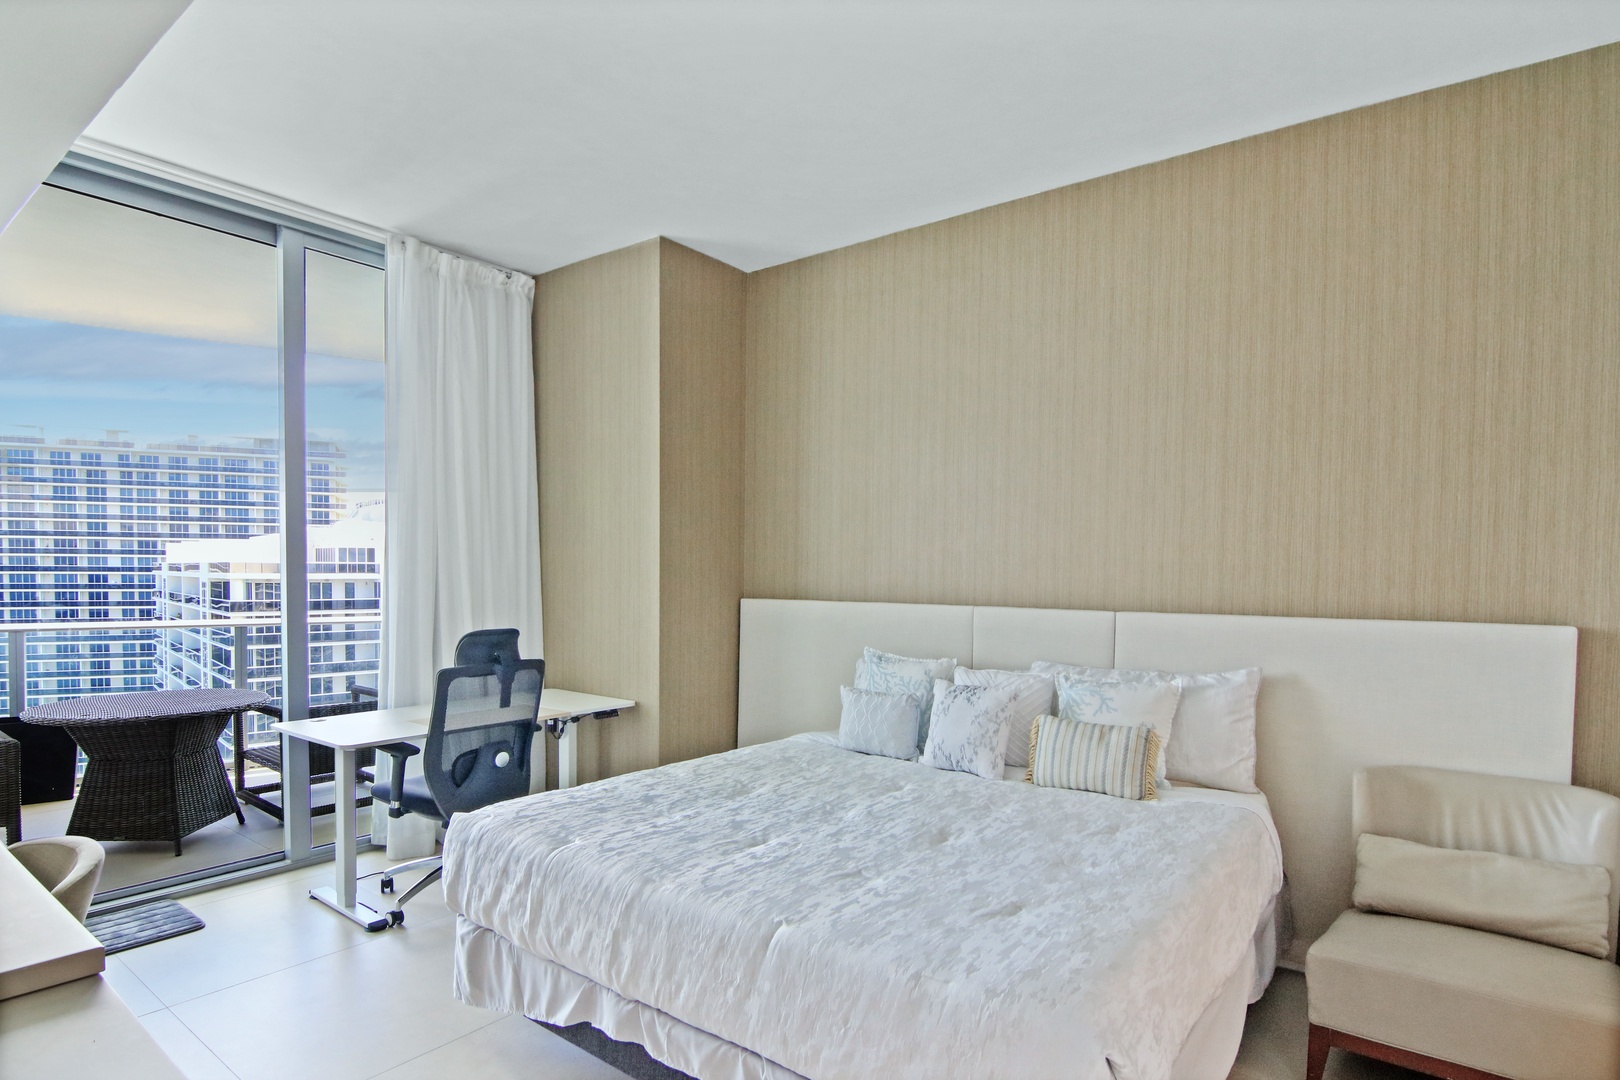 The 2nd of 2 king suites offers a private en suite, Smart TV, & balcony access